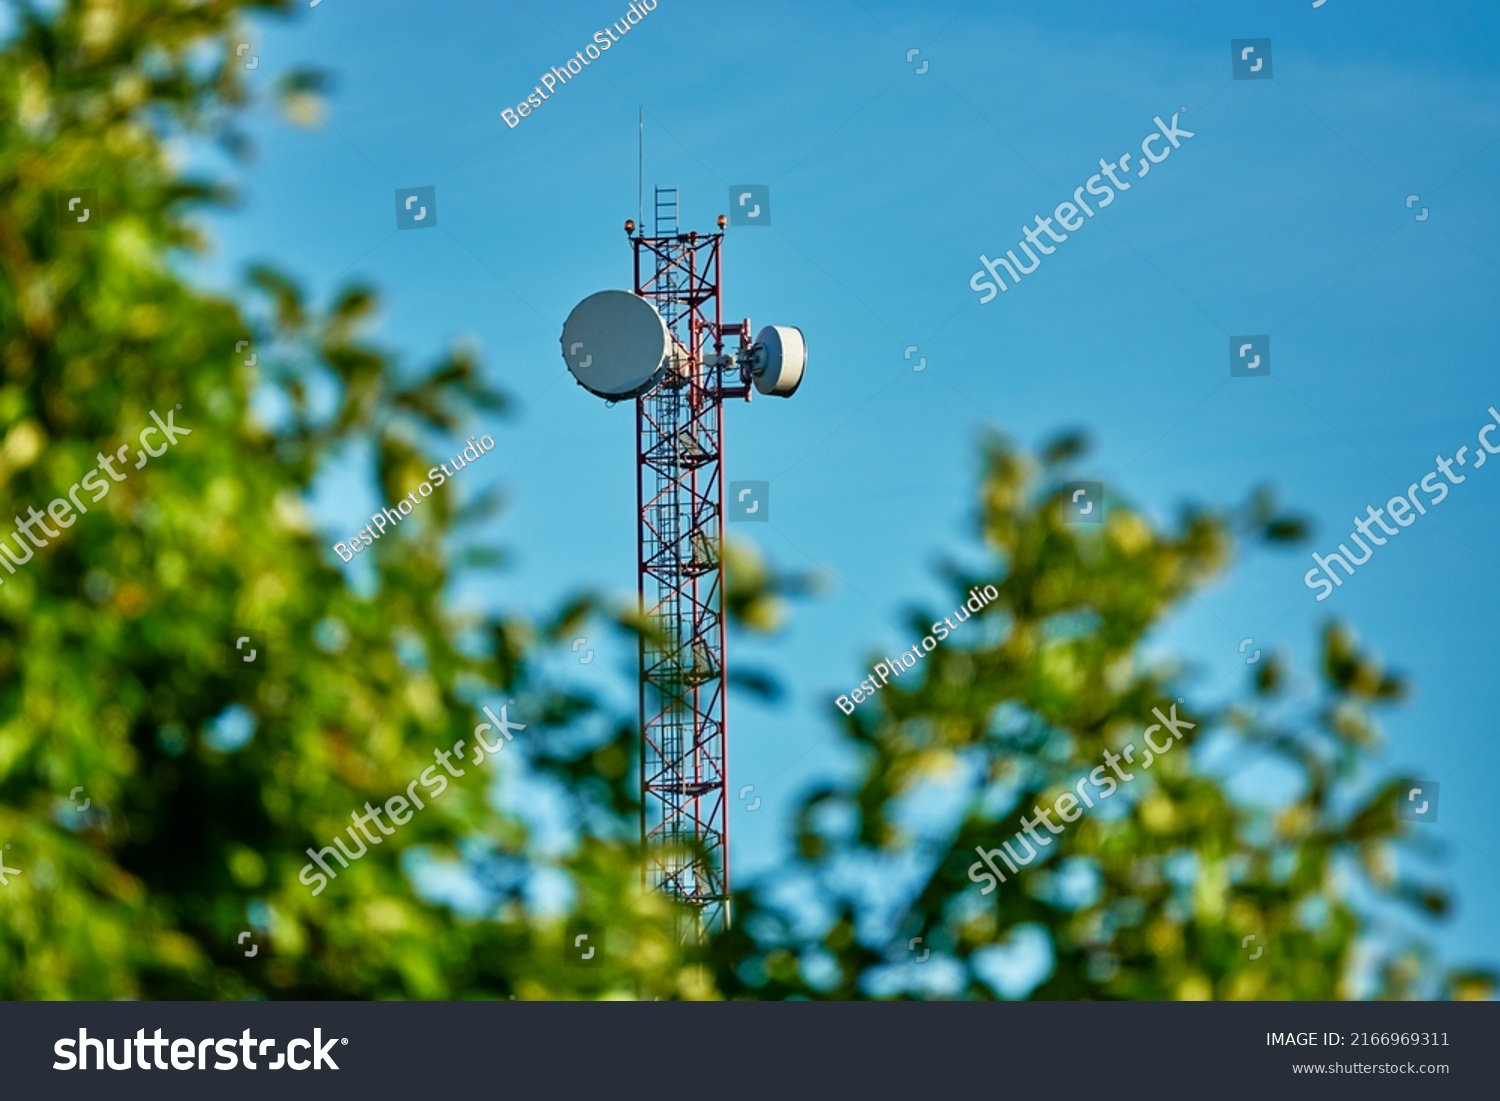 Mast with cell phone antennas against blue sky. Tree with green leaves. #2166969311